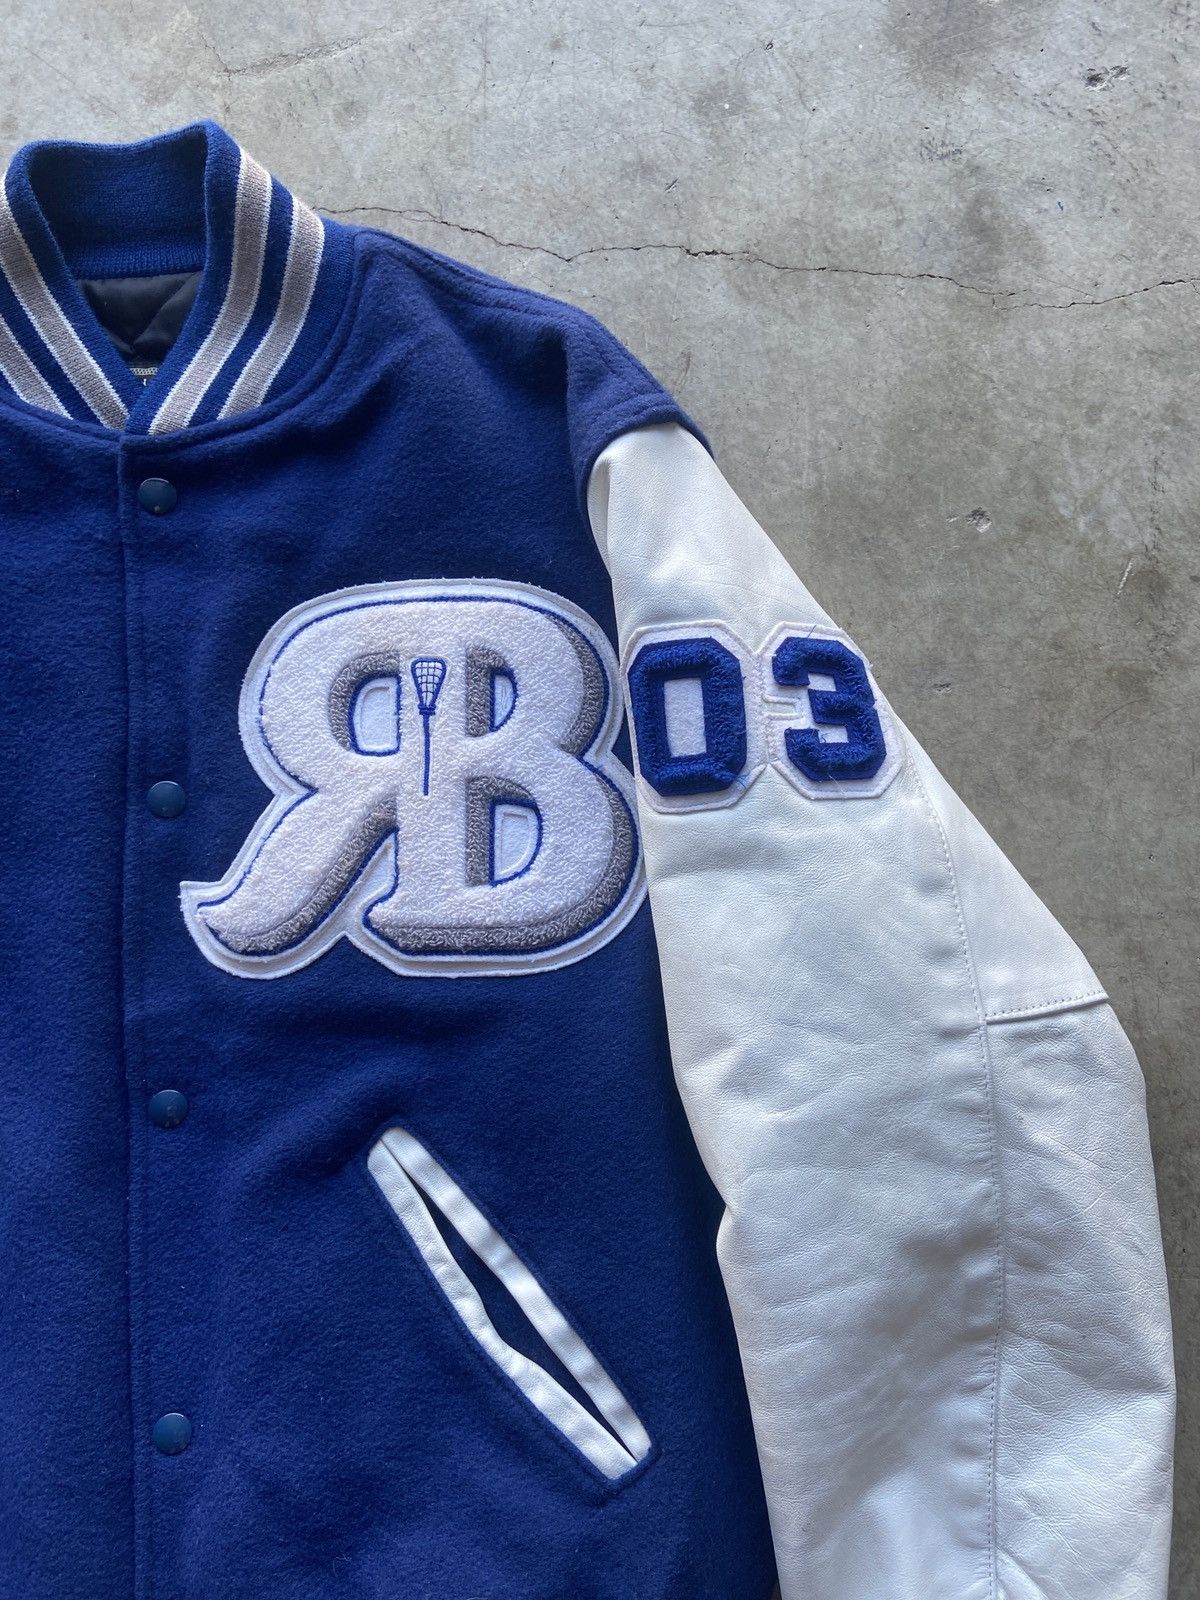 Vintage Vintage Blue Varsity Jacket Leather Sleeves Size Small Size US S / EU 44-46 / 1 - 2 Preview